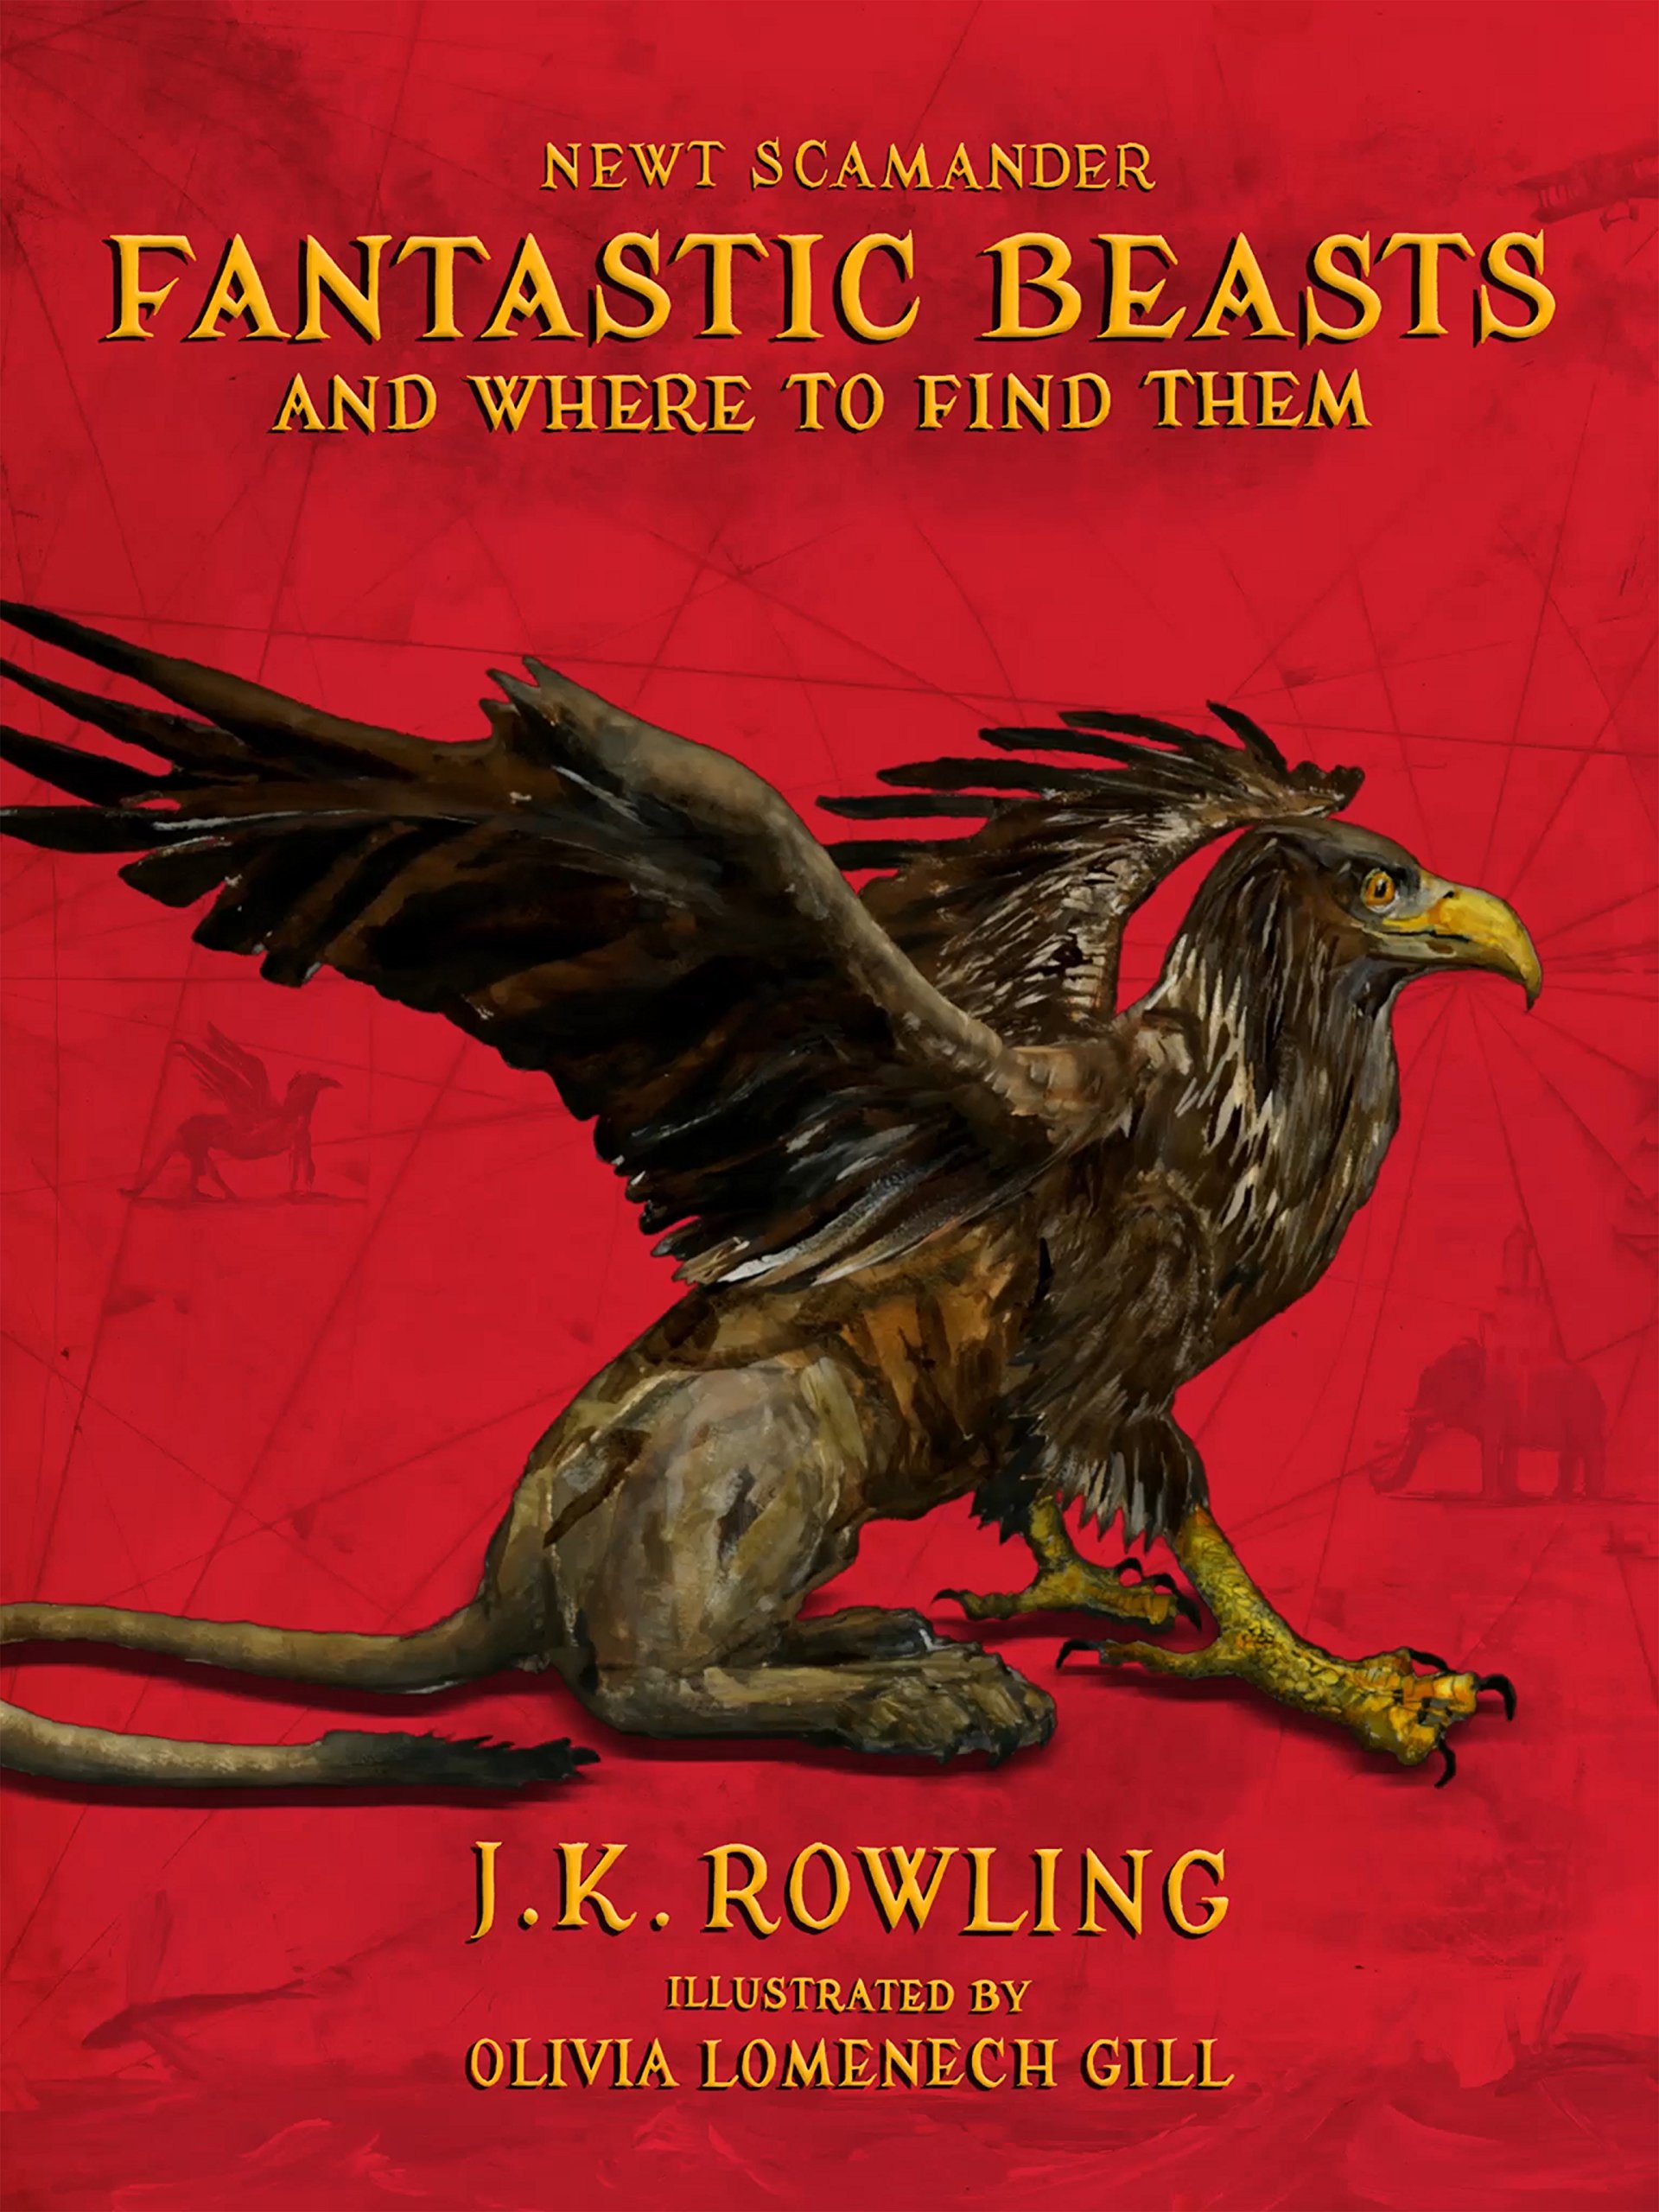 Fantastic Beasts and Where to Find Them: Illustrated edition (Harry Potter)